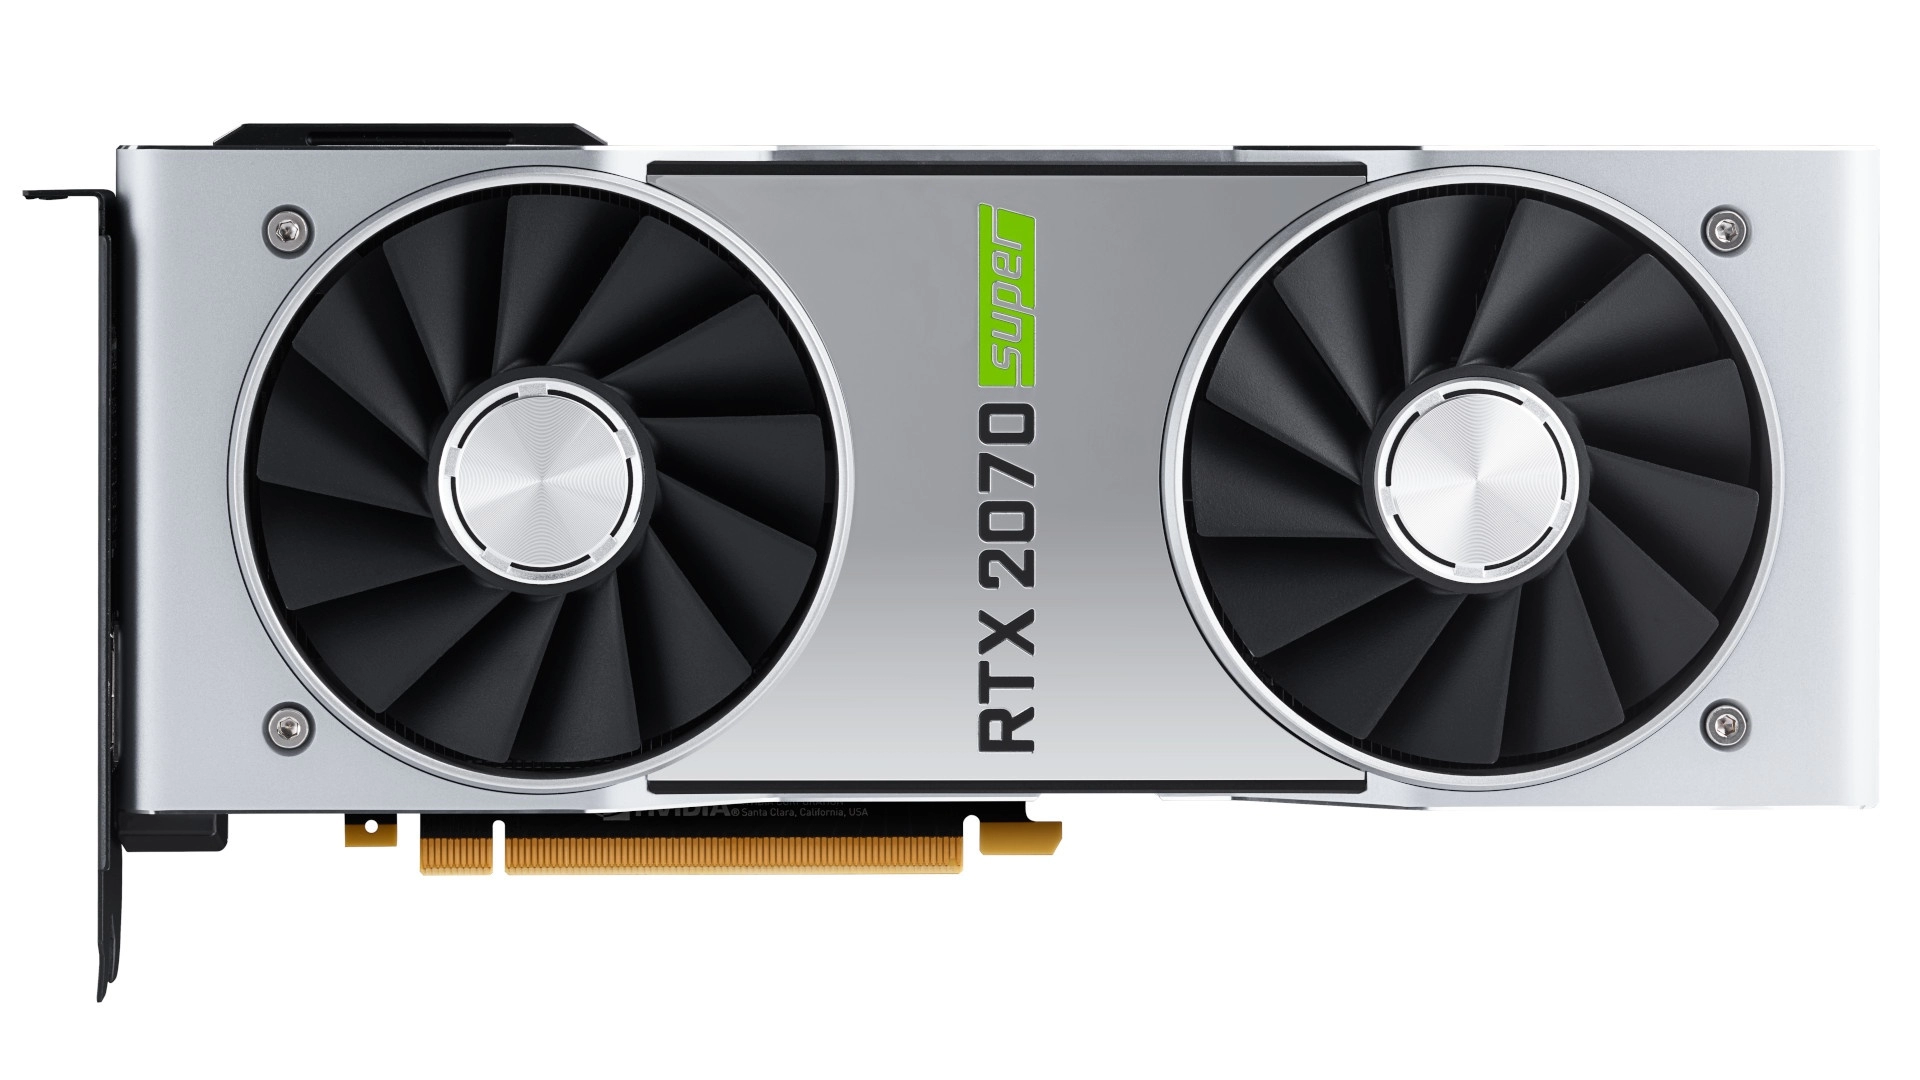 Nvidia GeForce RTX 2070 Super Founders Edition Image